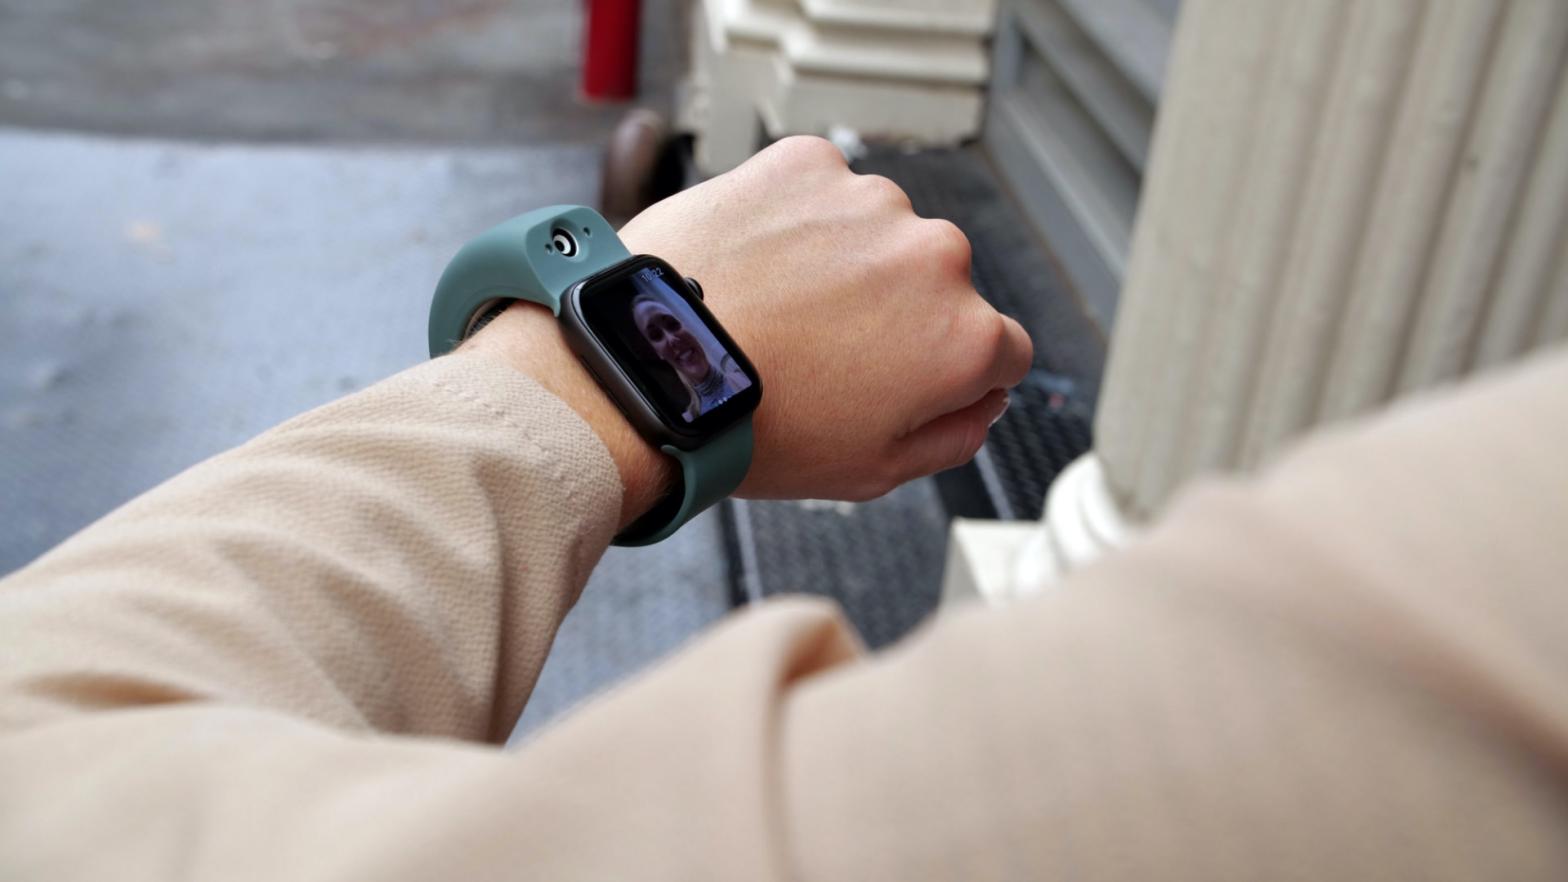 Wristcam is a $US300 ($403) Apple Watch band with a 2-megapixel front-facing camera. I know. I know! (Photo: Wristcam)